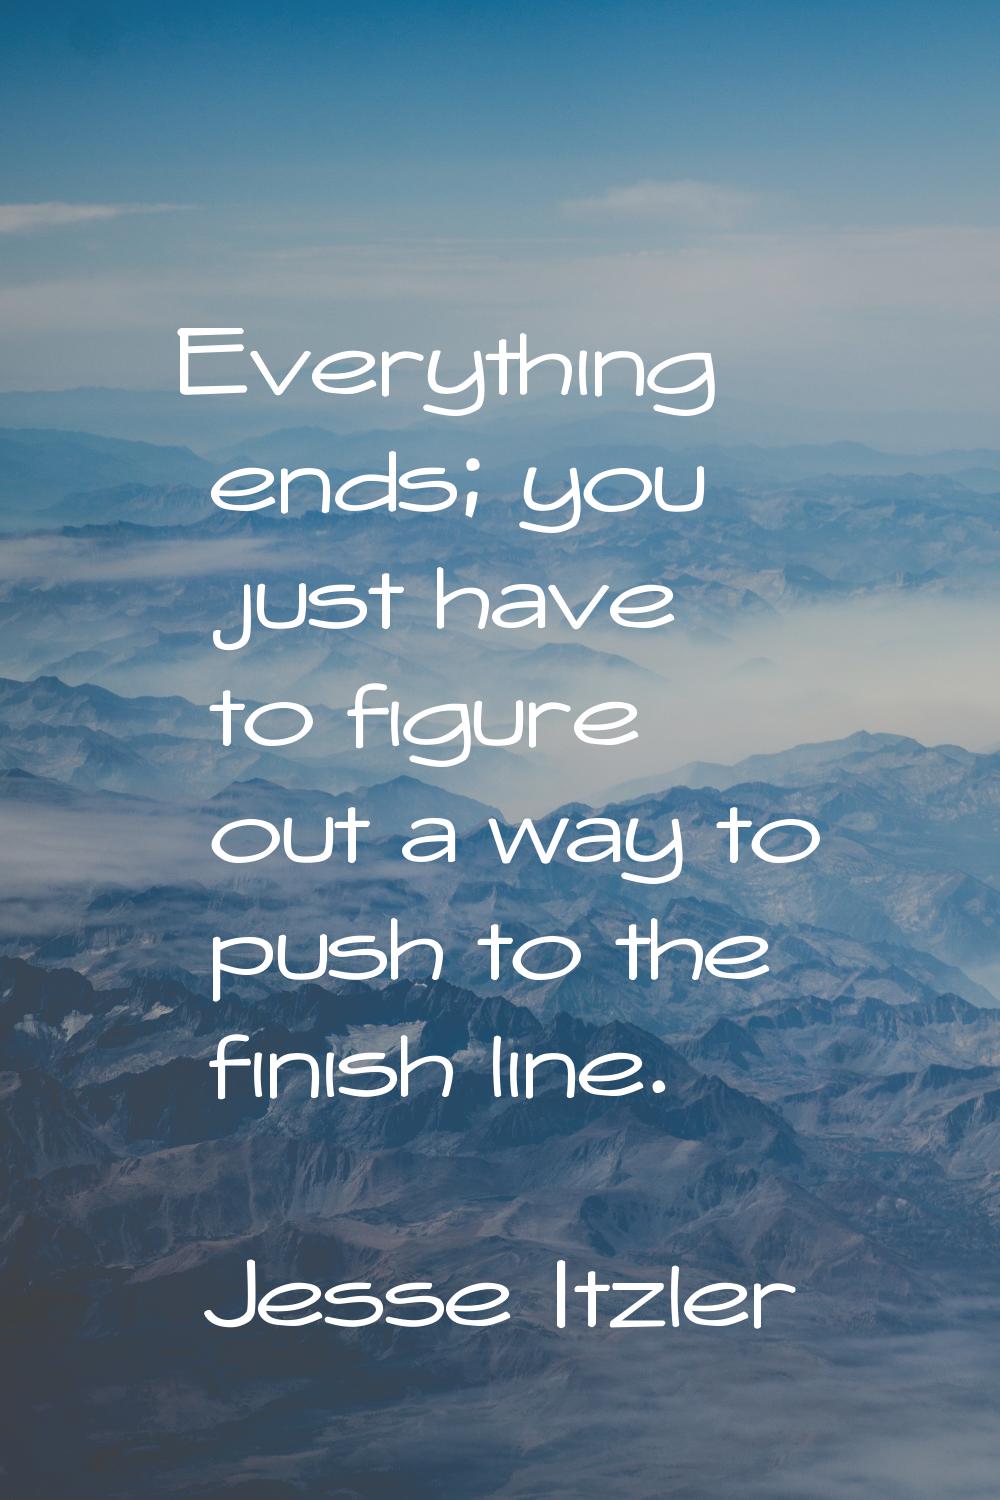 Everything ends; you just have to figure out a way to push to the finish line.